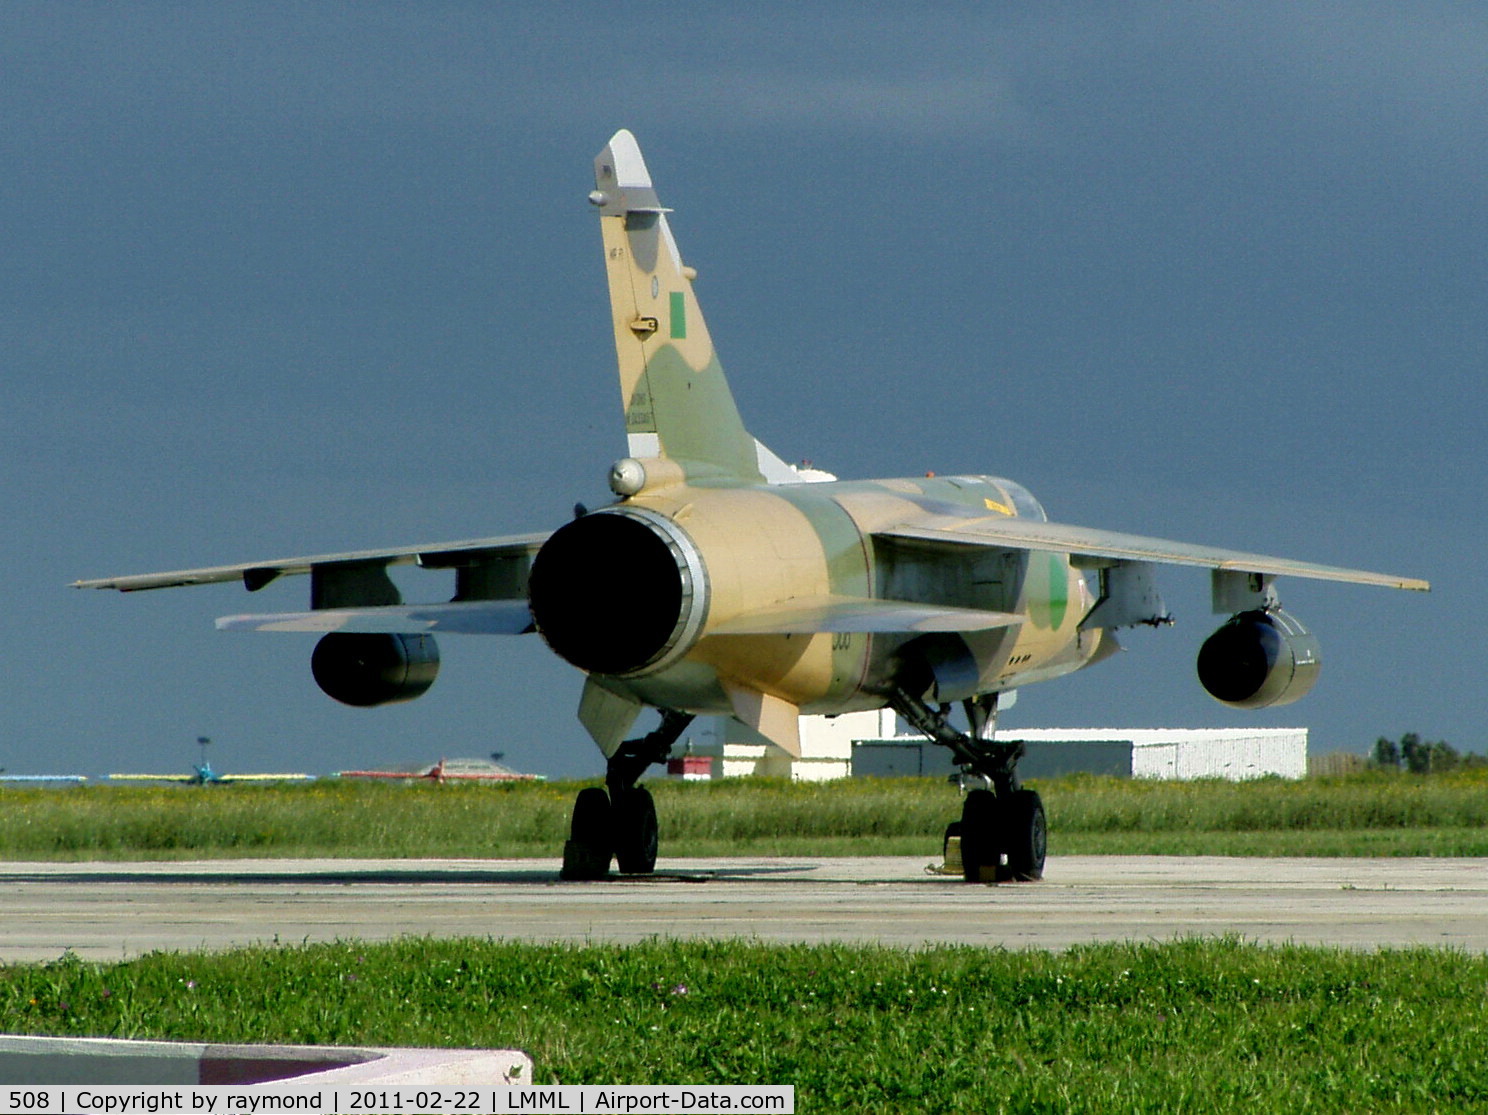 508, Dassault Mirage F.1ED C/N 508, Mirage F1 508 Libyan Air Force; aircraft flown into Malta after pilot refused to attack Benghazi during Libyan conflict.